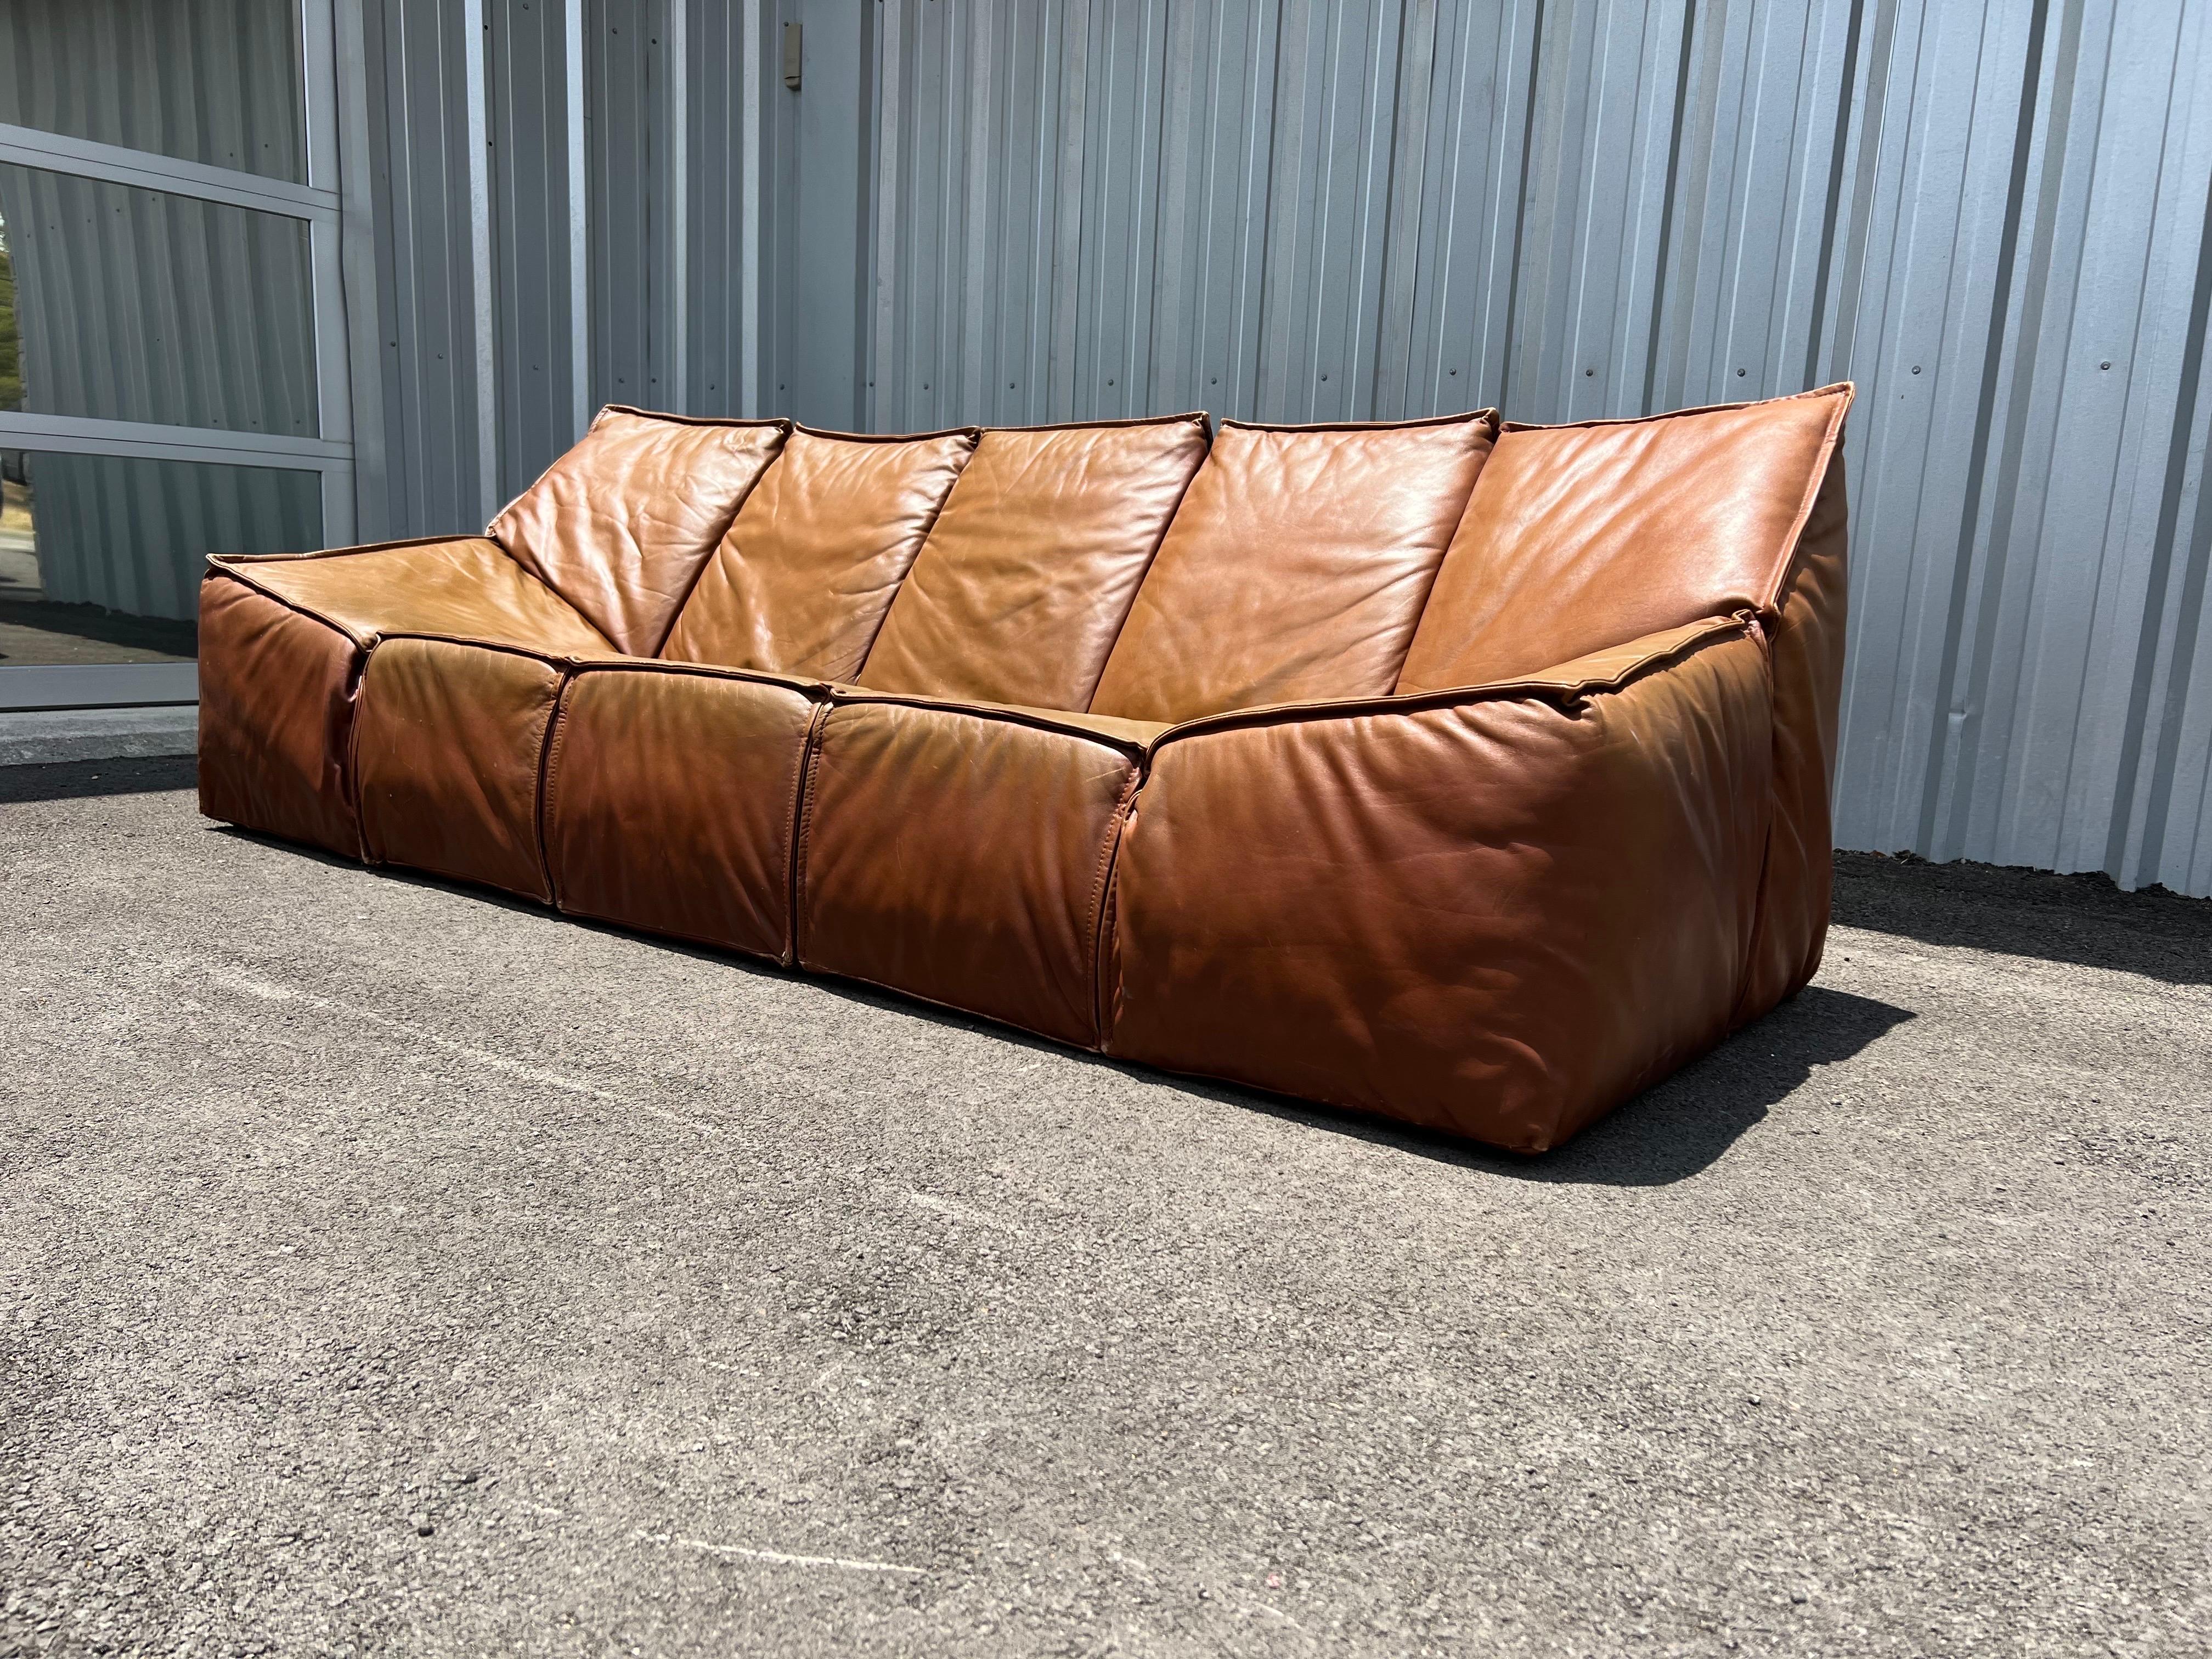 Vintage leather sofa by Roche Bobois, France, circa 1970s in cognac. This vintage sofa sits low and features a natural patina and is in good overall condition. 

Roche Bobois is a world leader in furniture design and distribution. Working closely